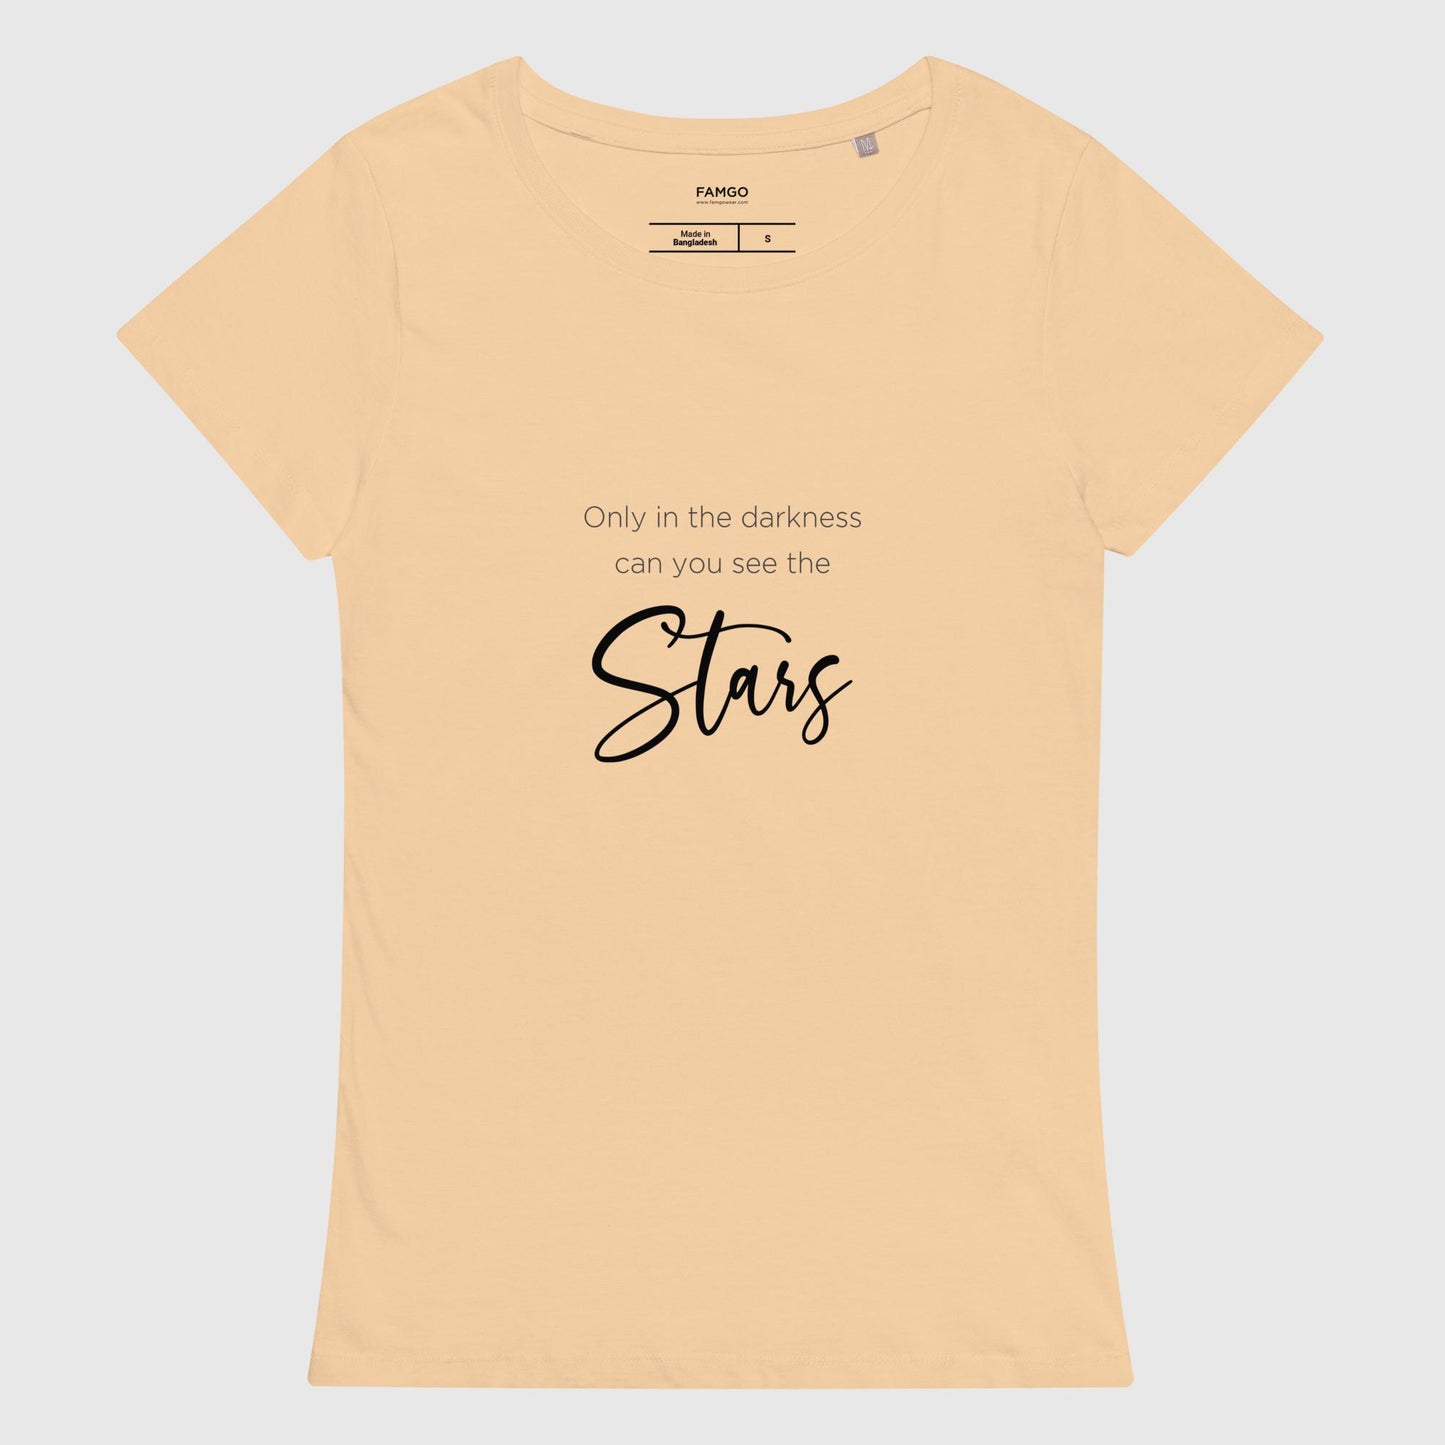 Women's sand organic cotton t-shirt with Dr. Martin Luther King Jr.'s inspirational quote, "Only In The Darkness Can You See The Stars."